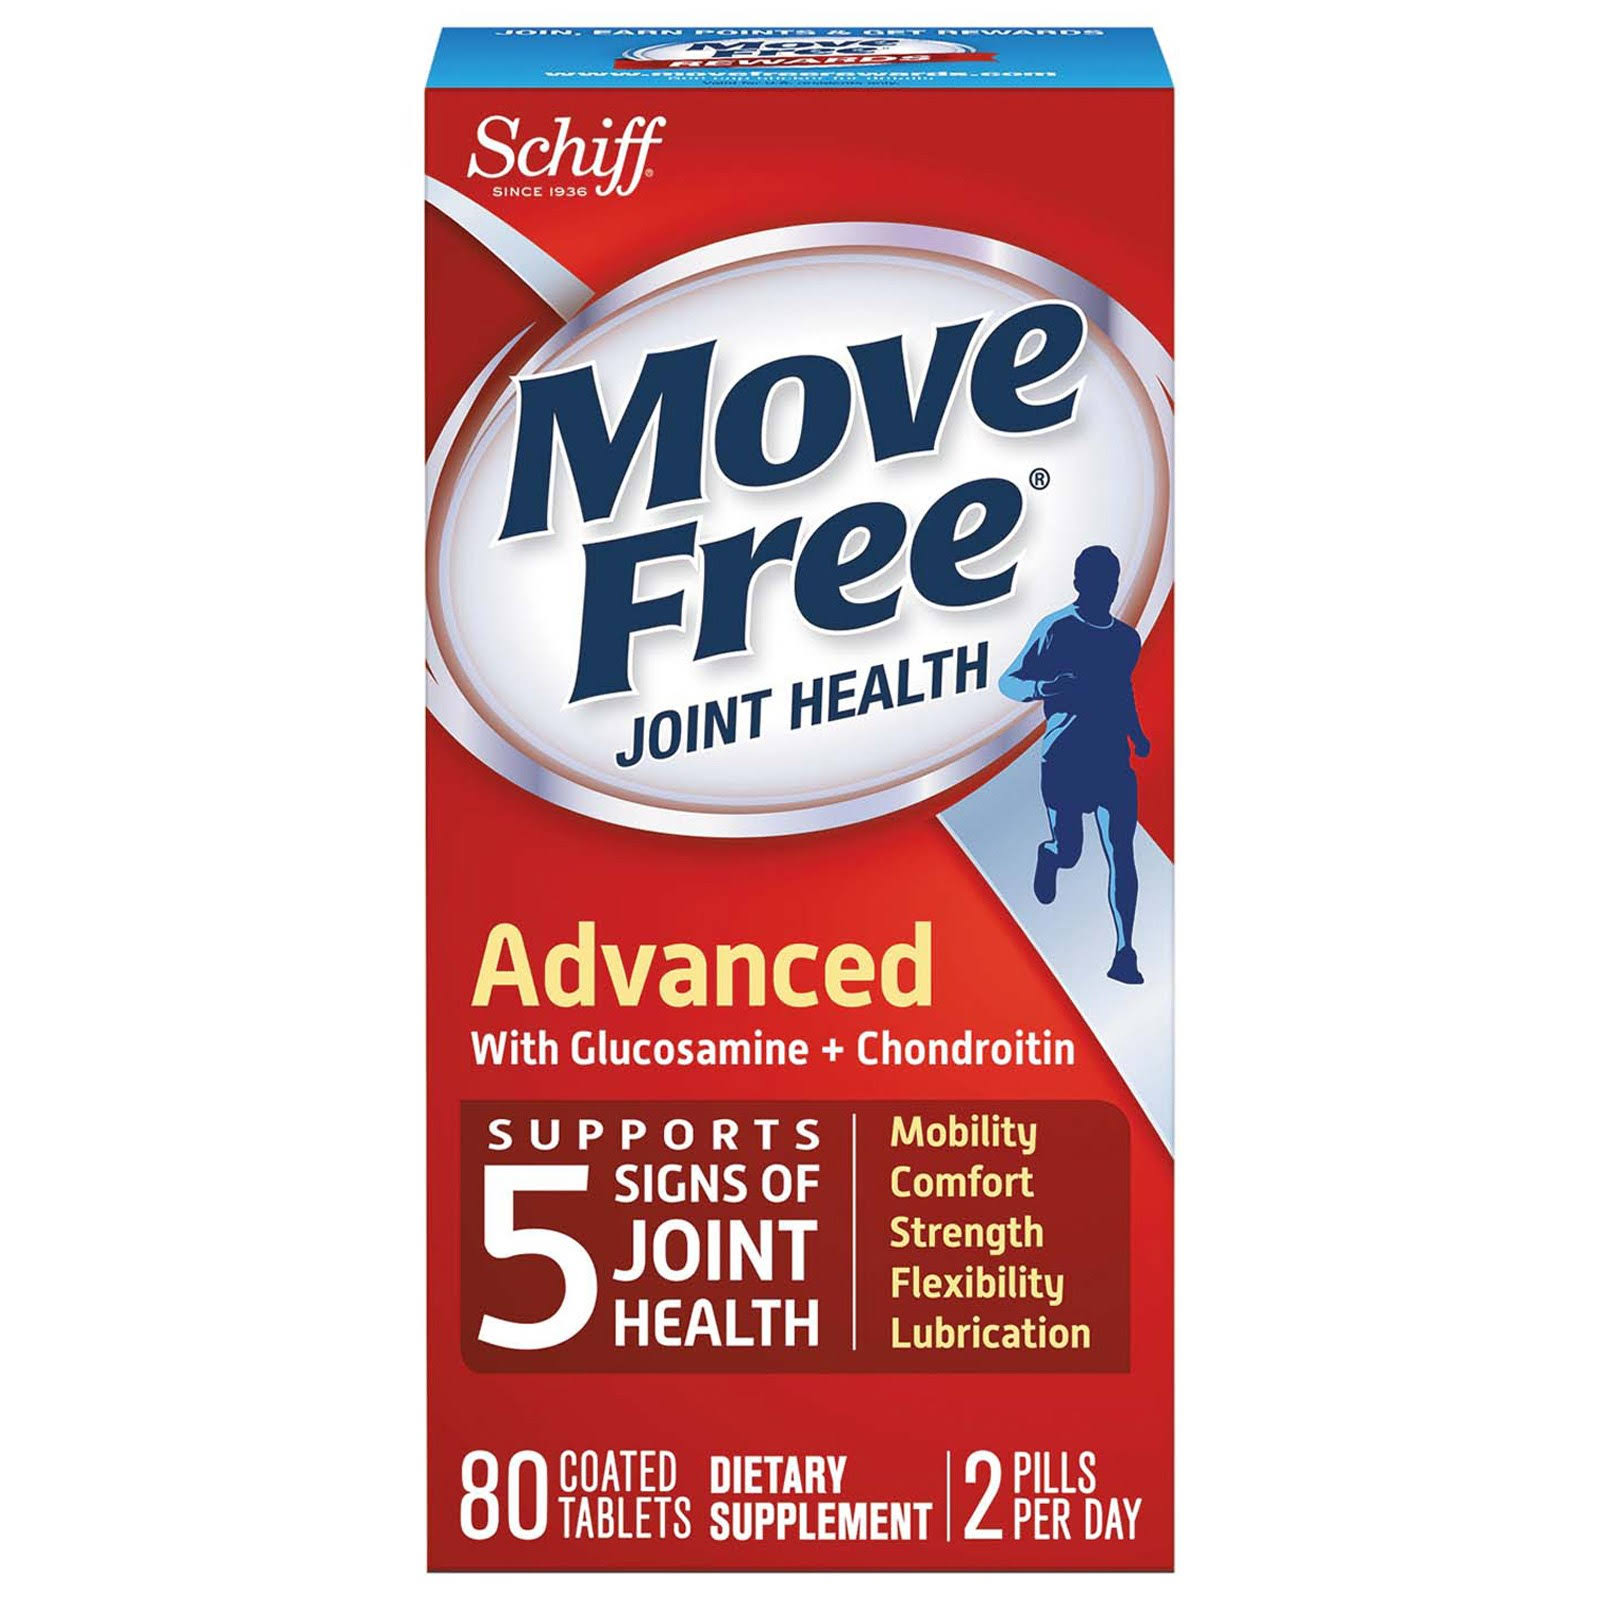 Schiff Move Free Joint Health Advanced with Glucosamine and Chondroitin Tablets - 80ct